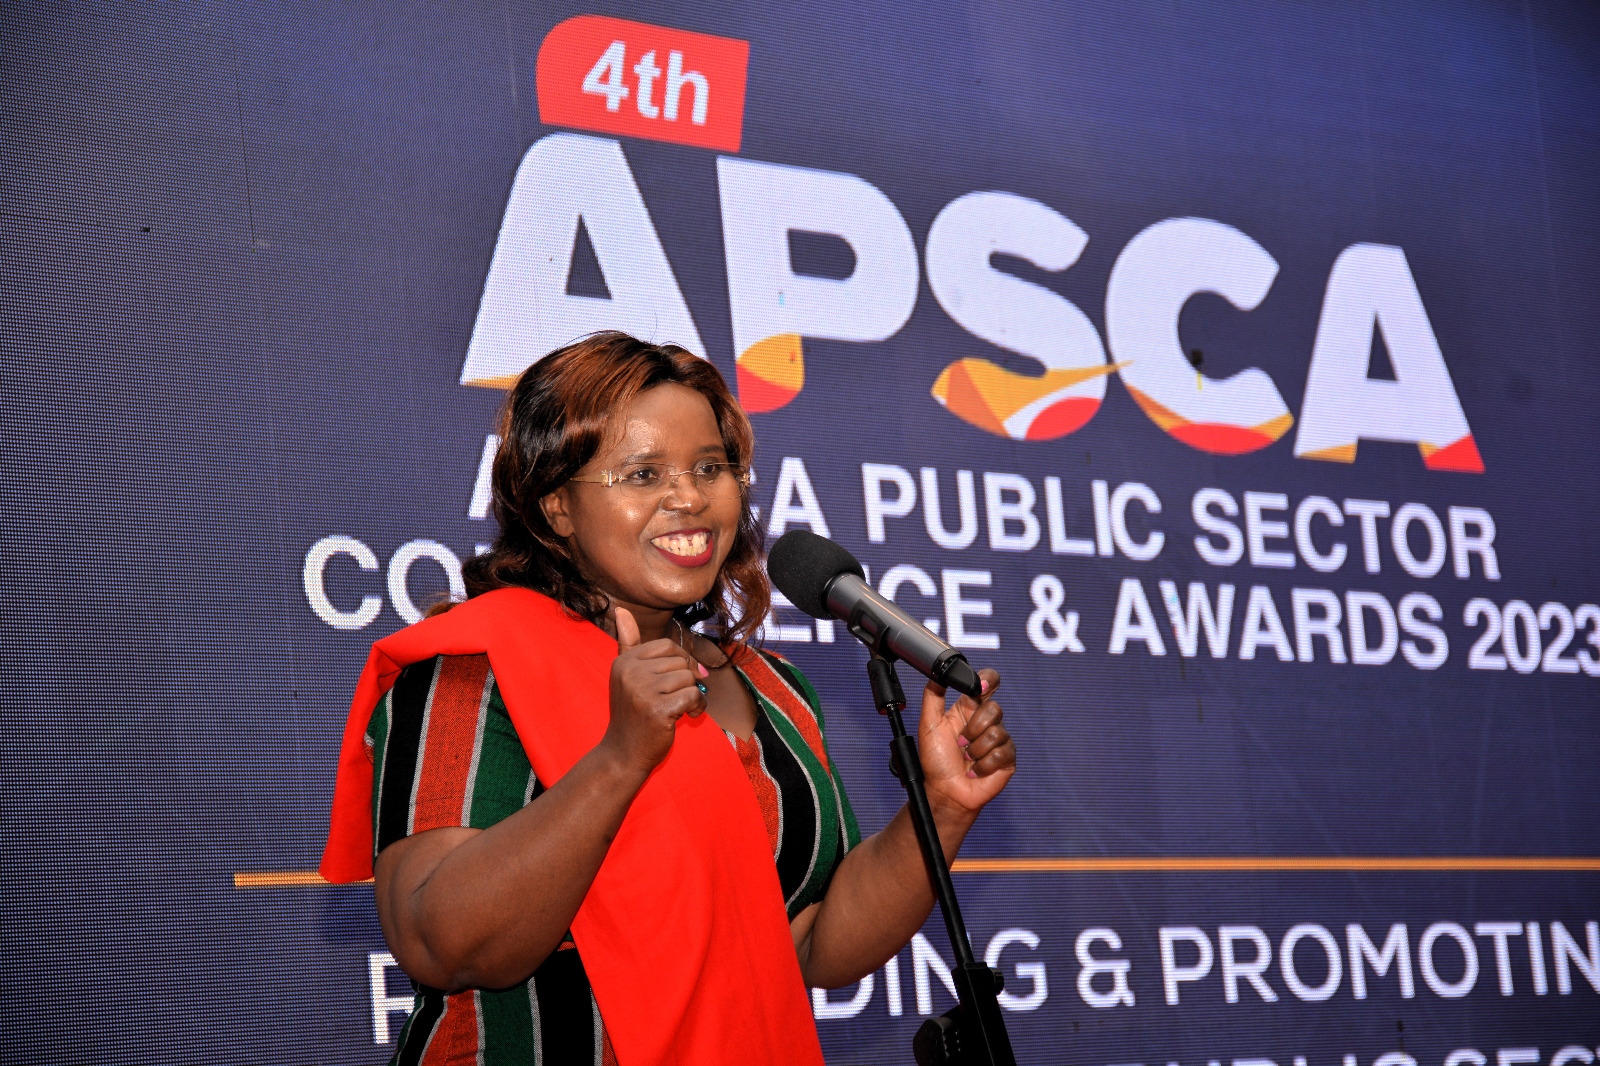 The Cabinet Secretary for Tourism, Wildlife and Heritage, Hon. Peninah Malonza, giving her acceptance speech.